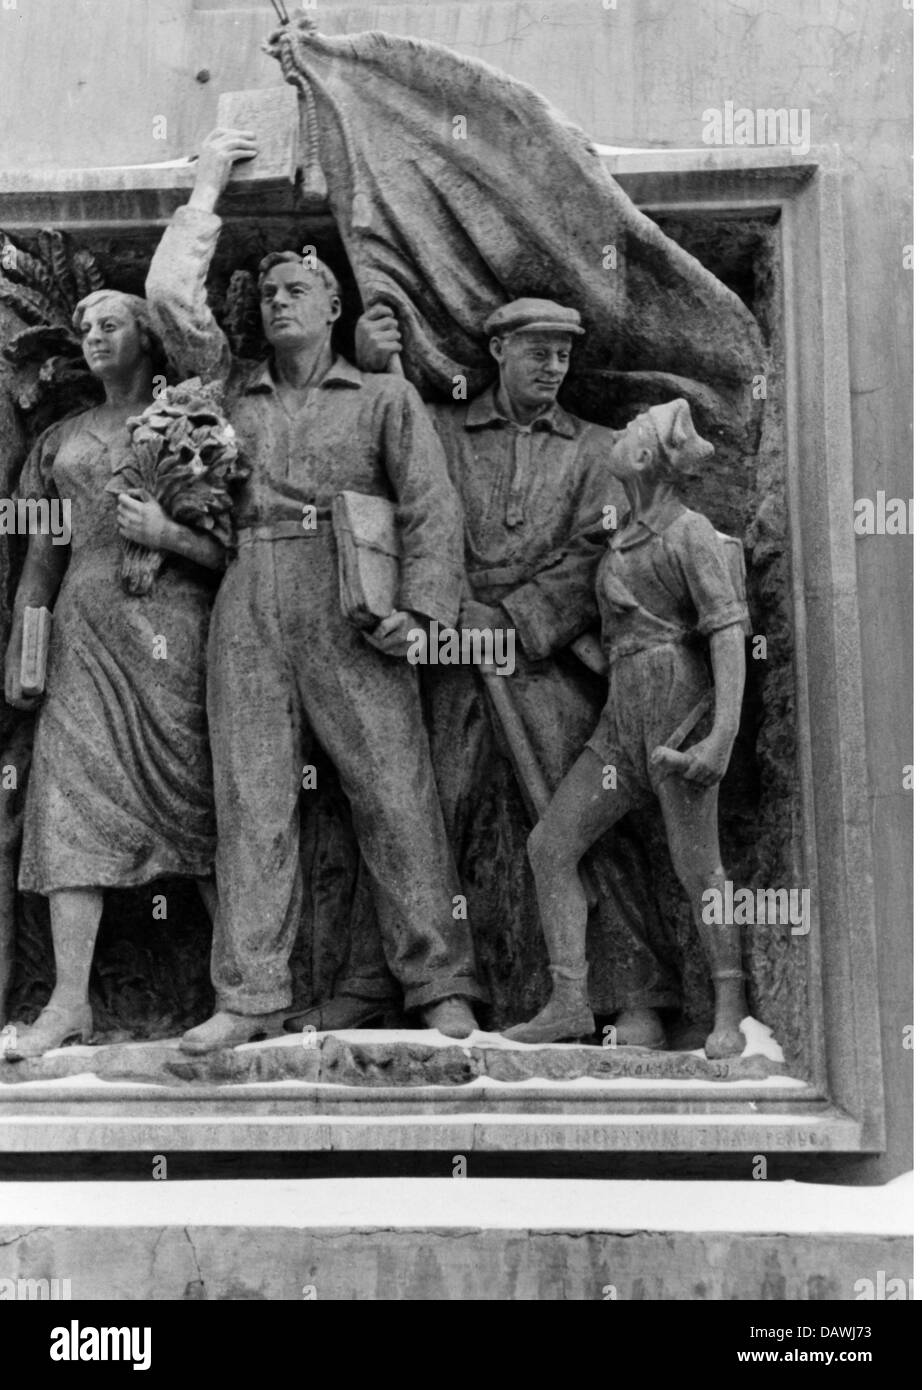 fine arts, Soviet Union, relief on the face of a building in Stalino (Donetsk), showing working class people, February 1943, Additional-Rights-Clearences-Not Available Stock Photo